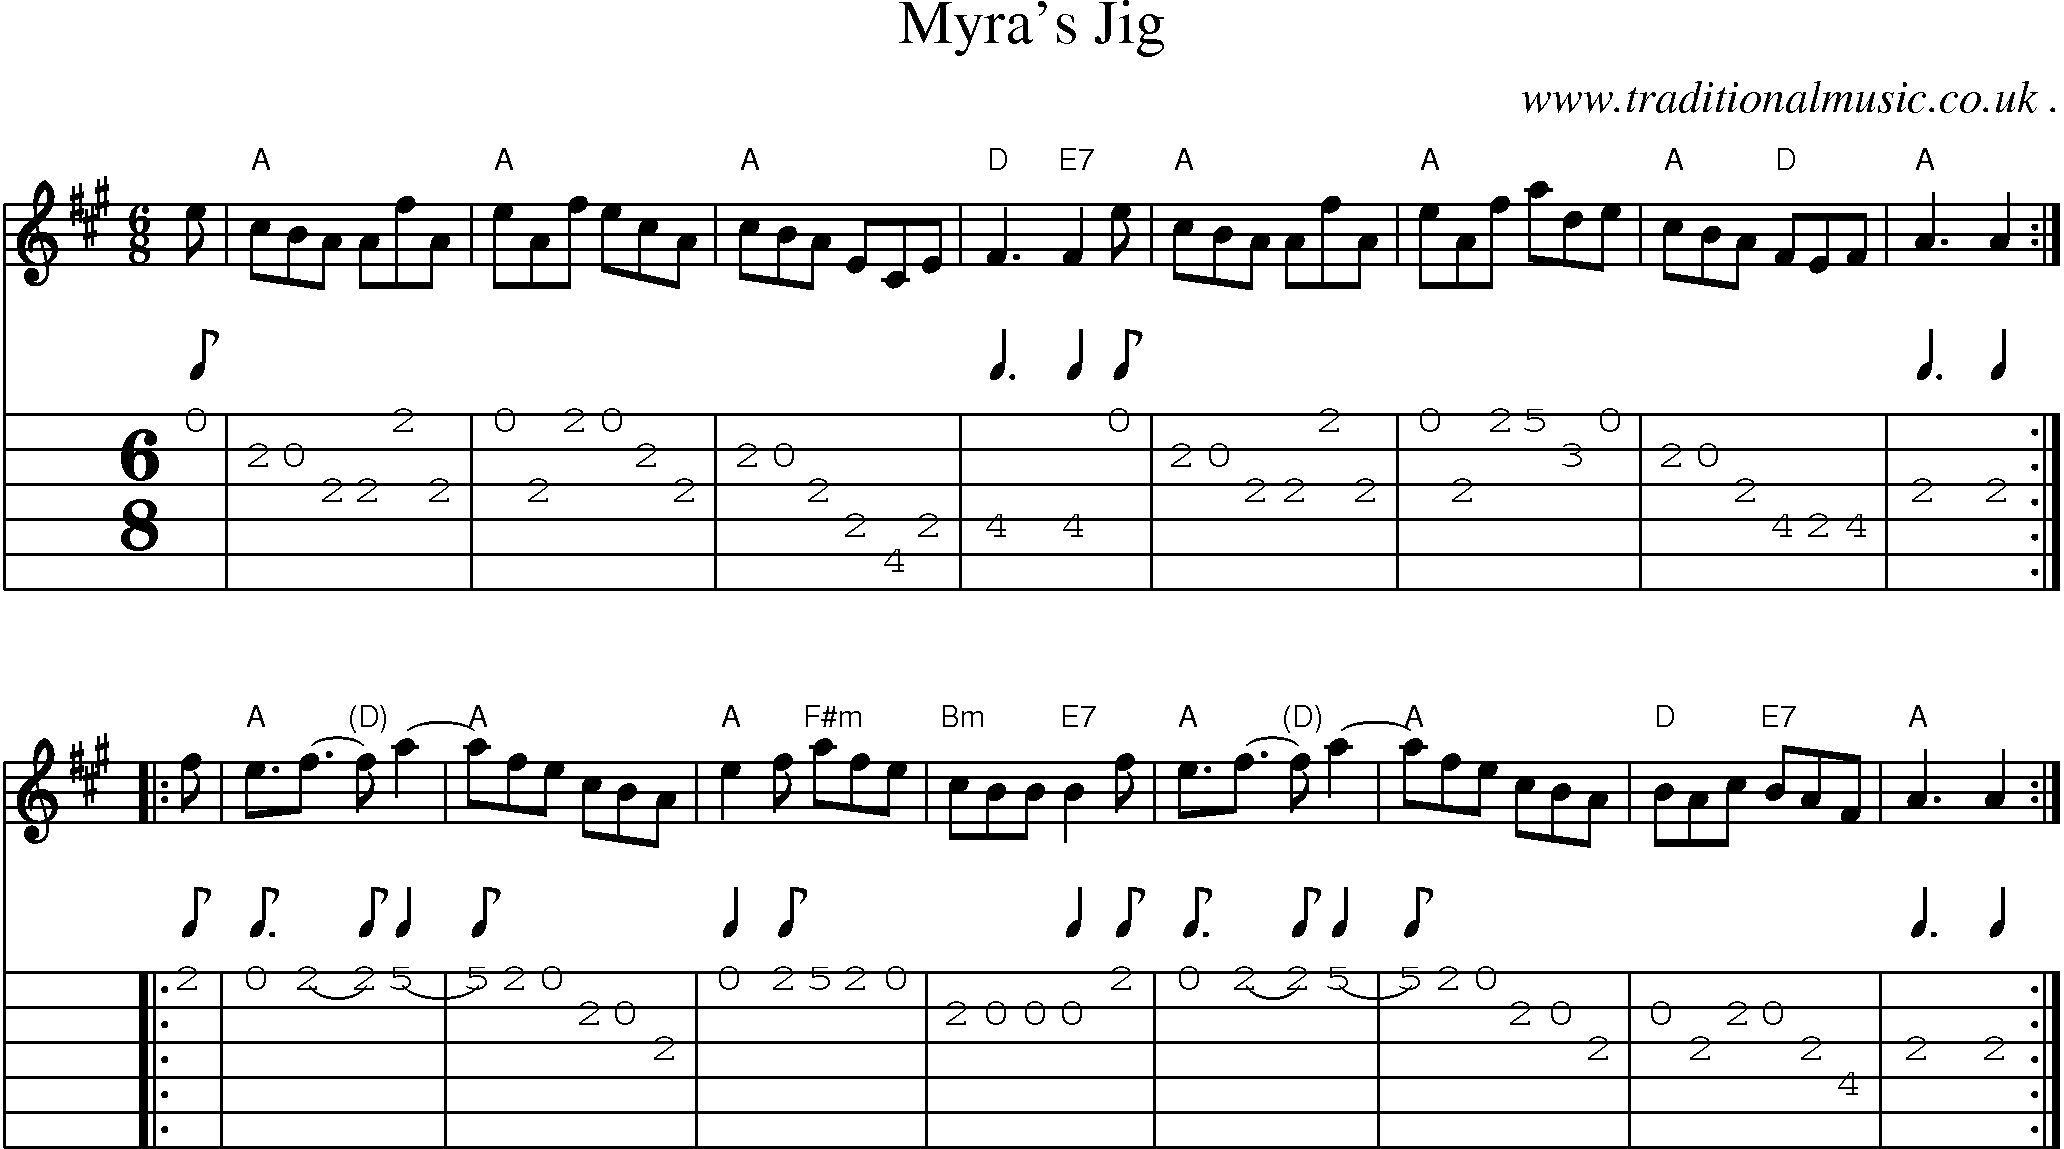 Sheet-music  score, Chords and Guitar Tabs for Myras Jig